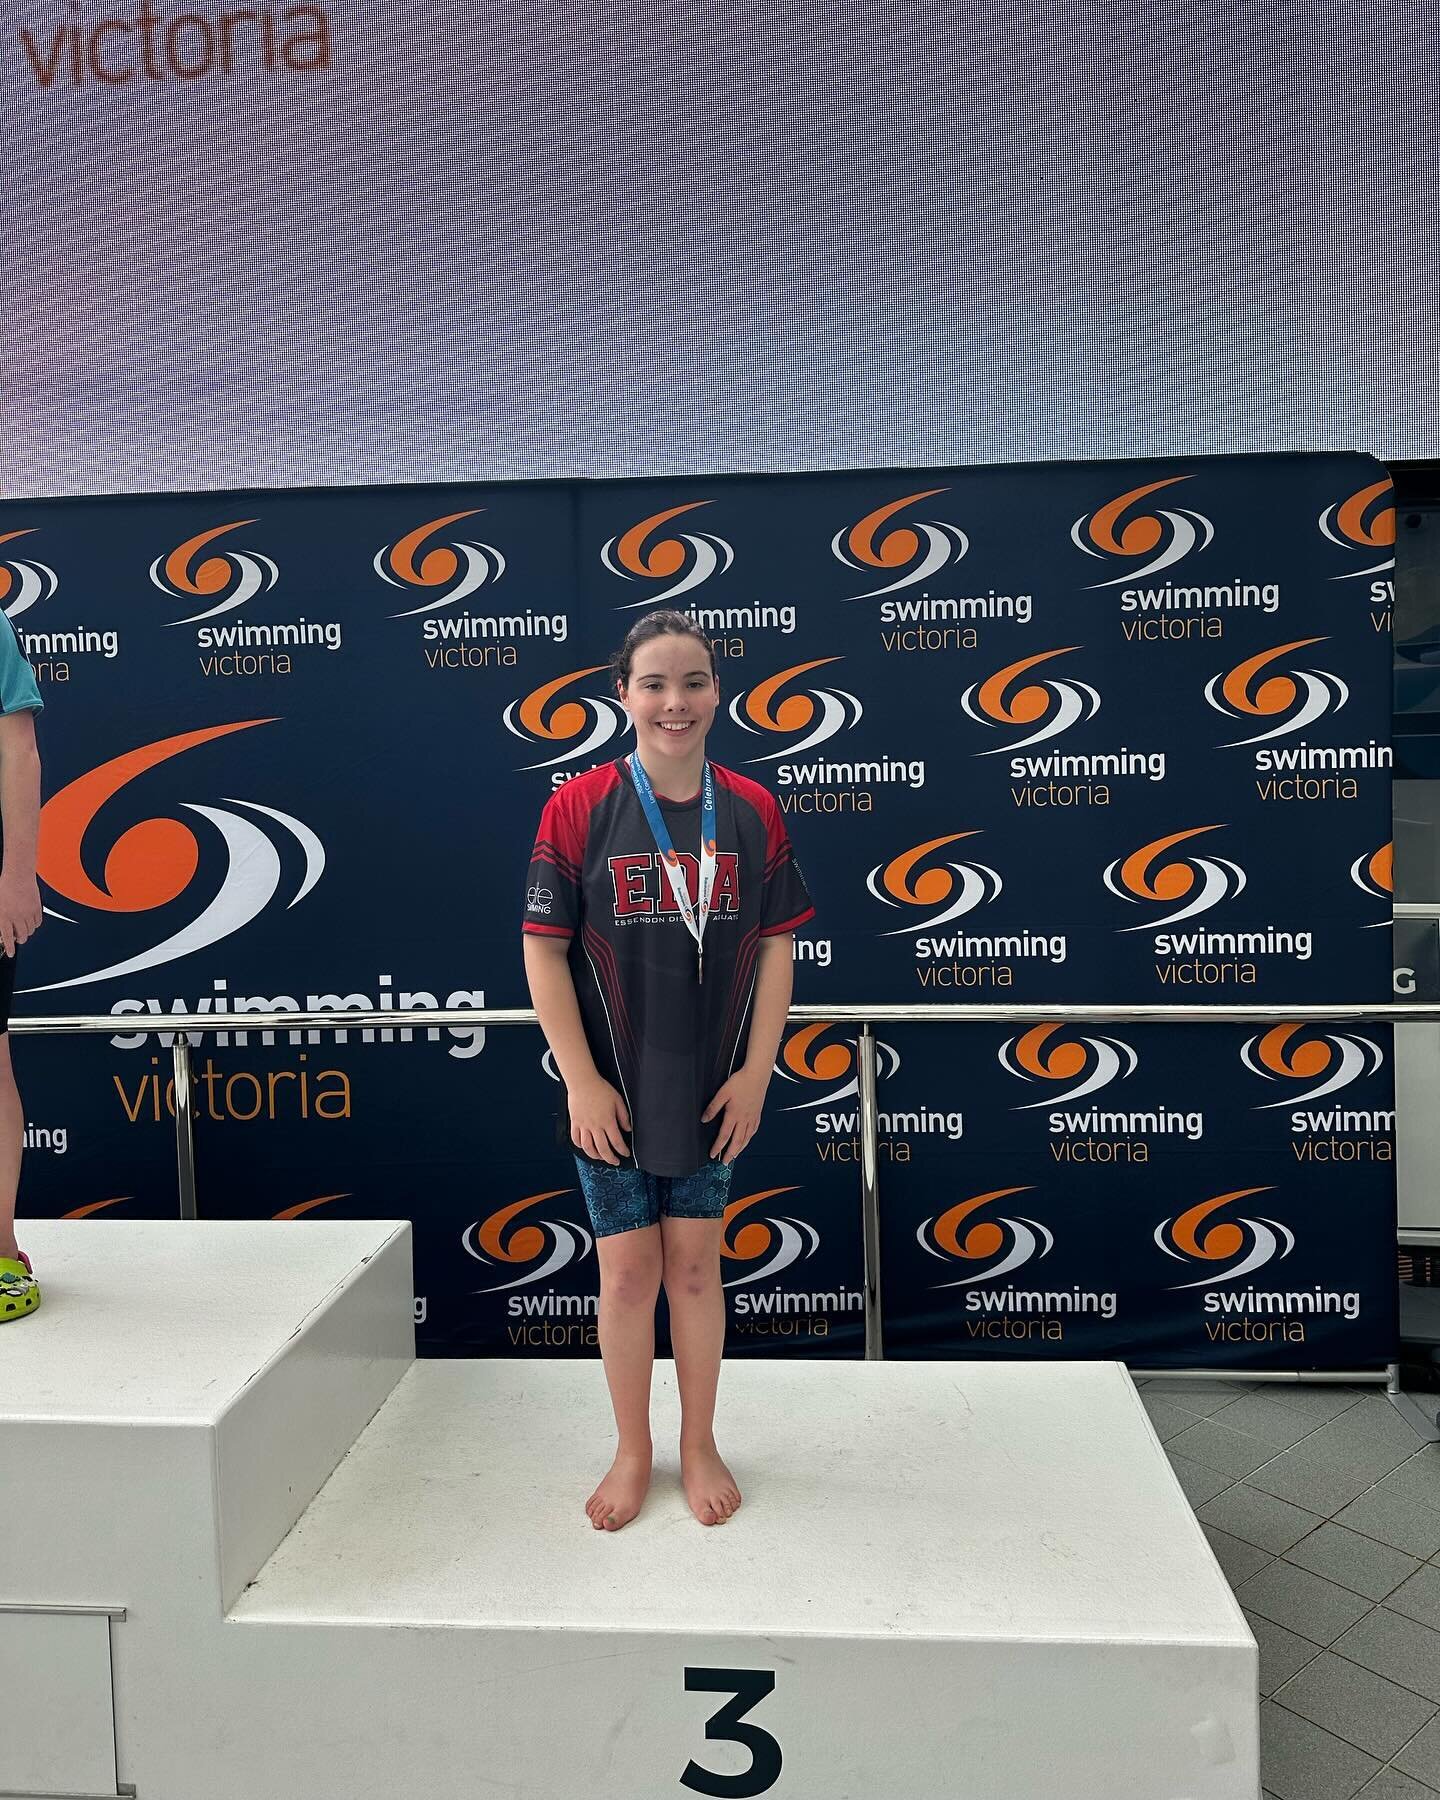 Victorian Age Championships Day 3 Finals!
Night 3 saw Molly, Mia and Alan back in the pool for finals. We then had 3 relay teams in action. Special shout out to Ella and Elsie who stepped up at the last minute and swam some amazing splits!
Molly
🥉20